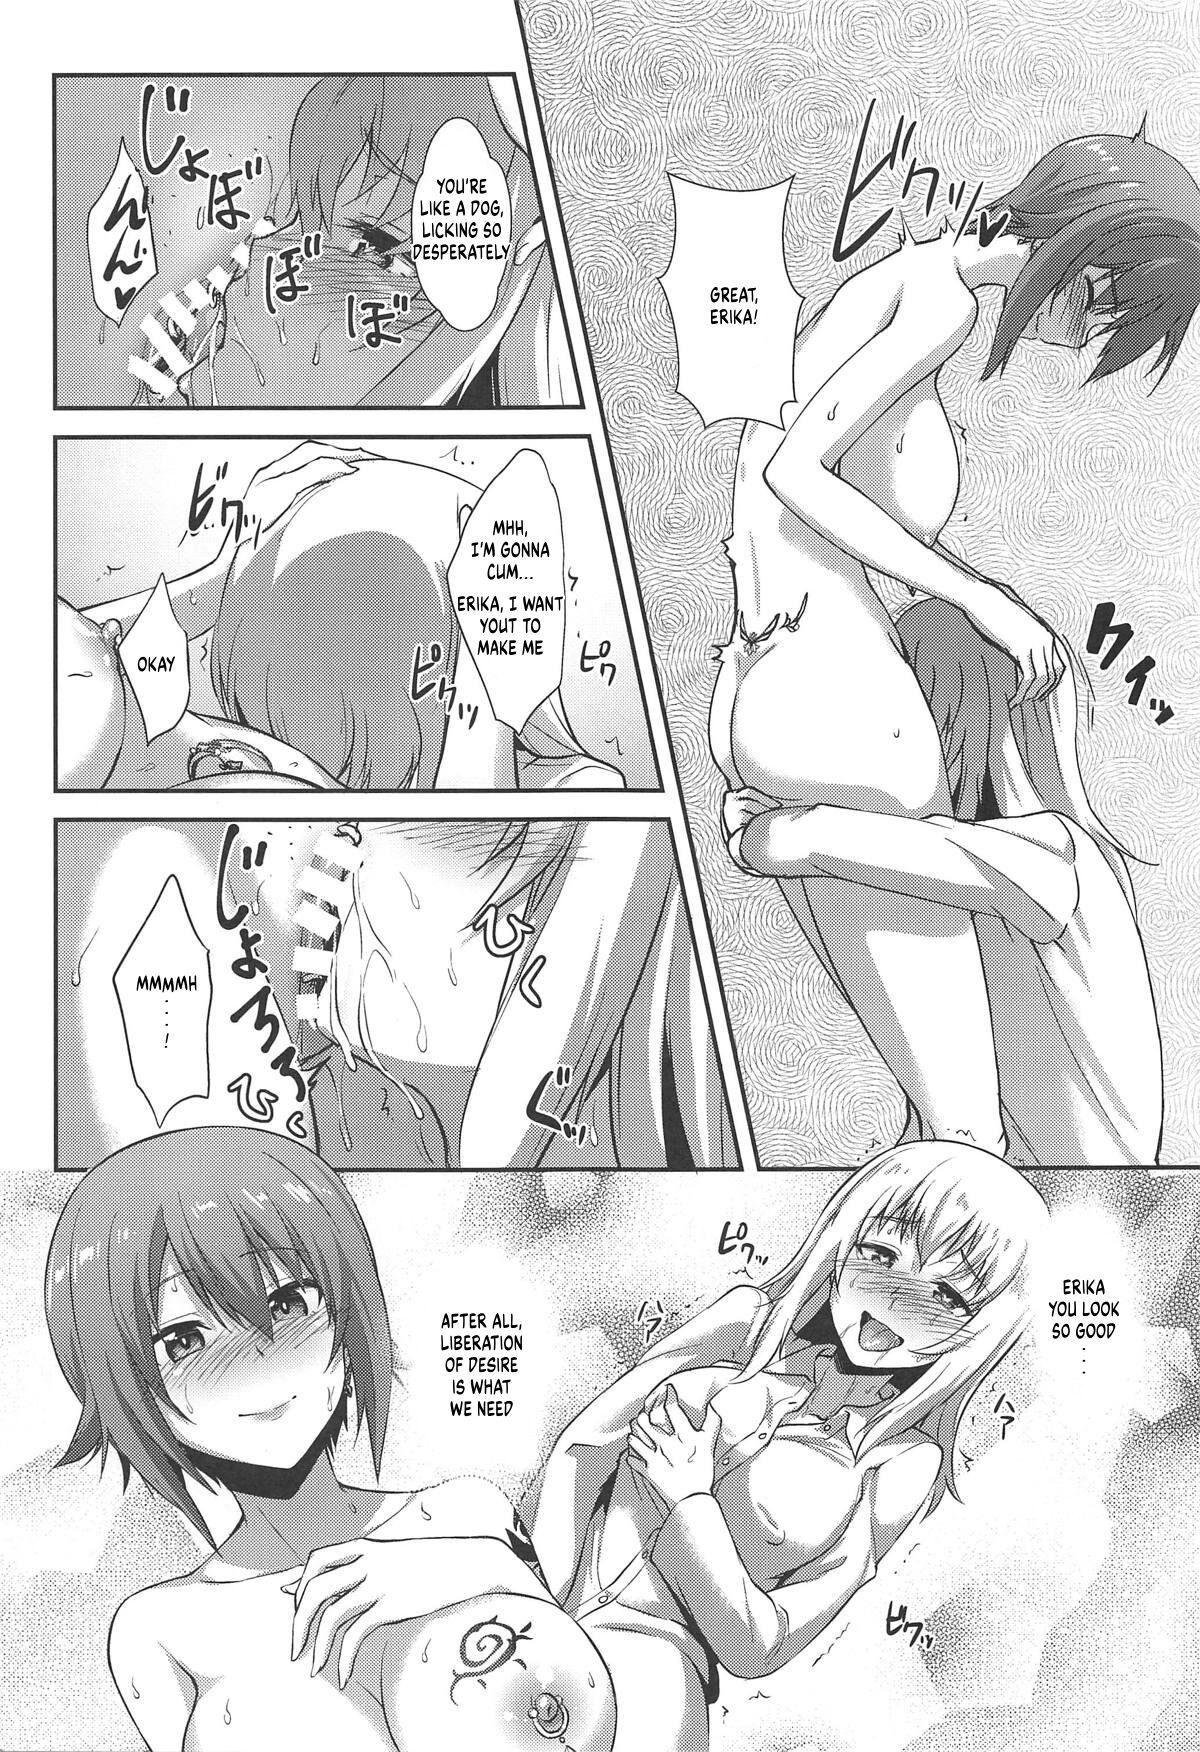 Hindi The Way How a Matriarch is Brought Up - Maho's Case, Bottom - Girls und panzer Porra - Page 11